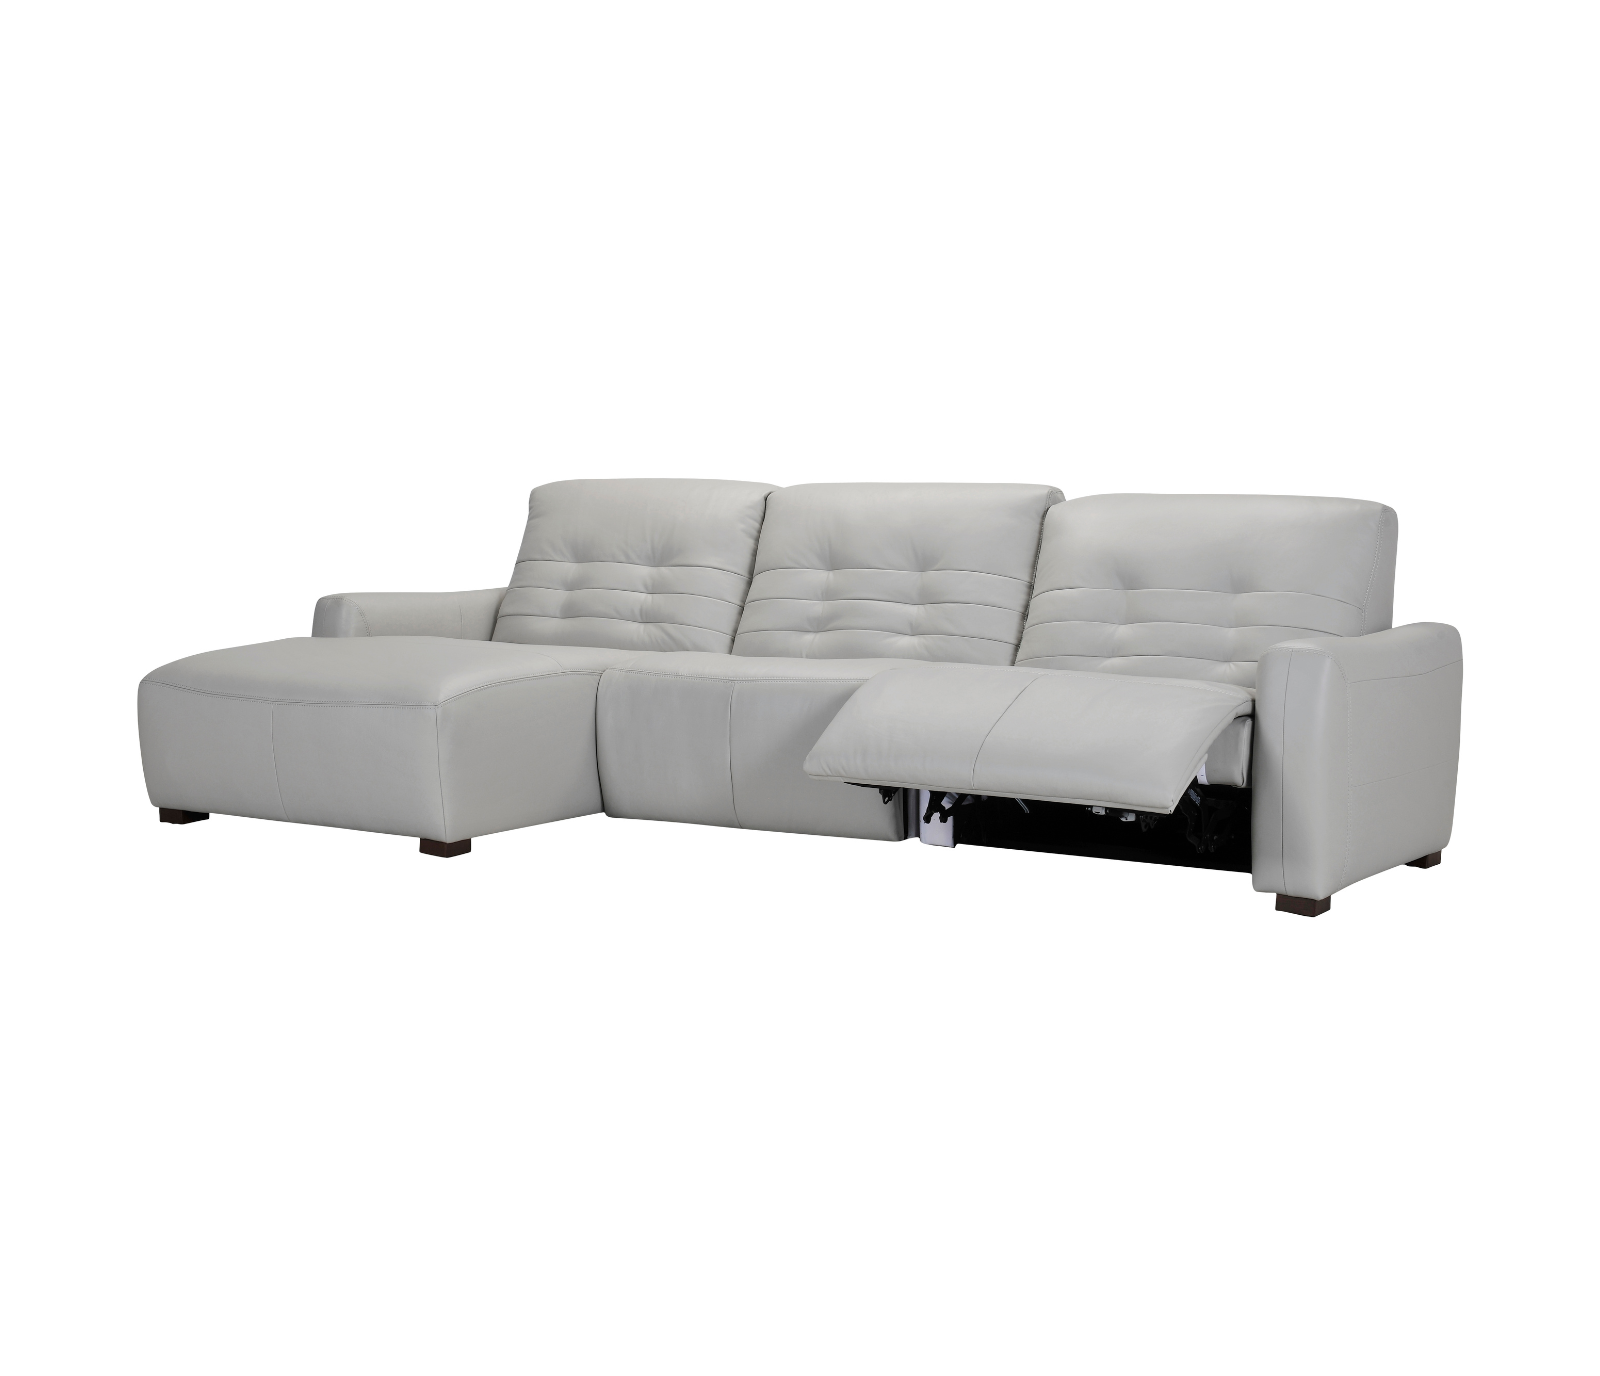 Bronx 3 Piece Power Reclining Sectional - Dove Grey Leather